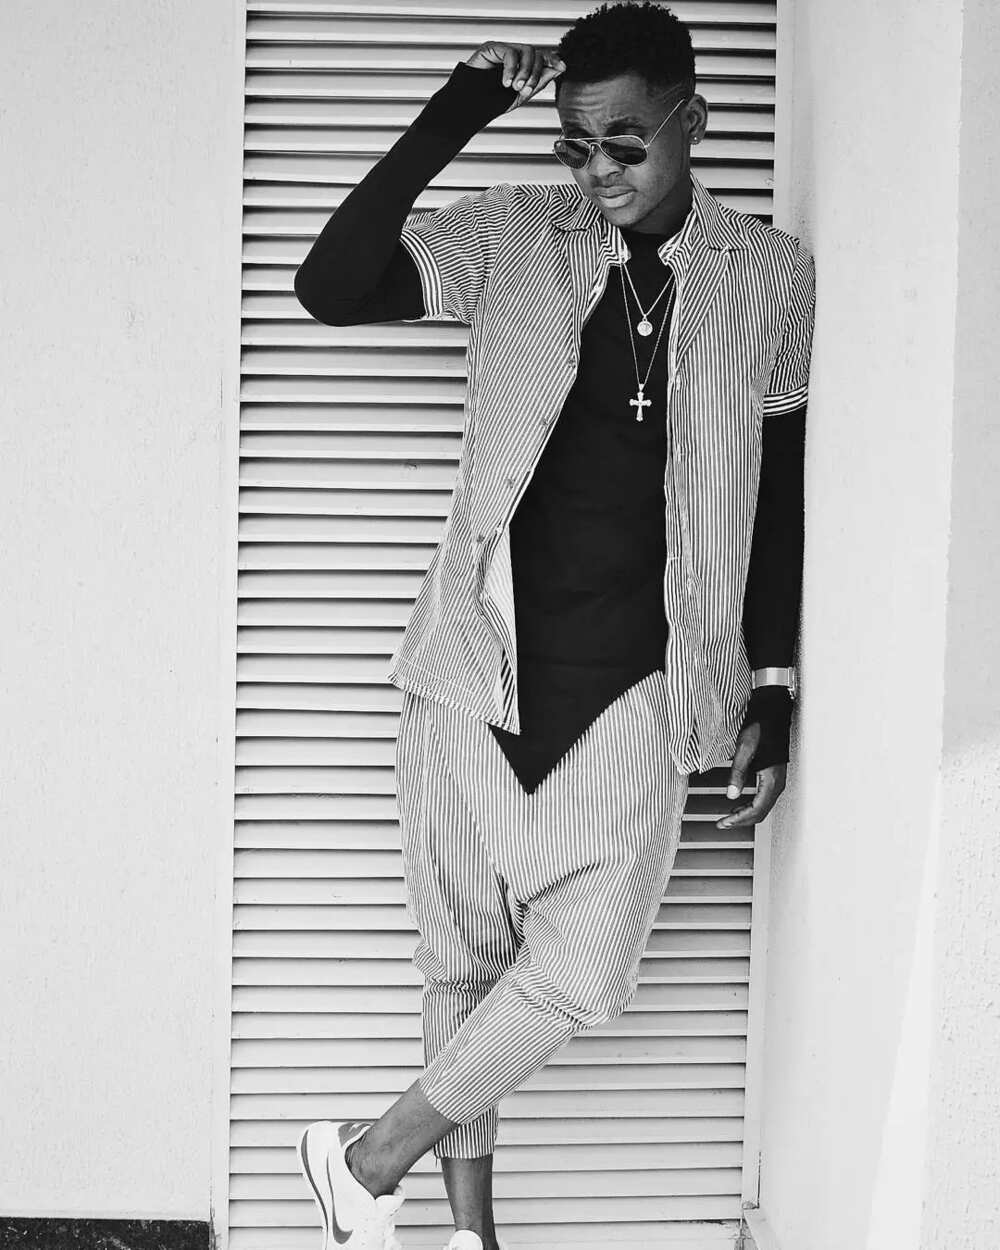 Kiss Daniel quits G-Worldwide, sets up his own label